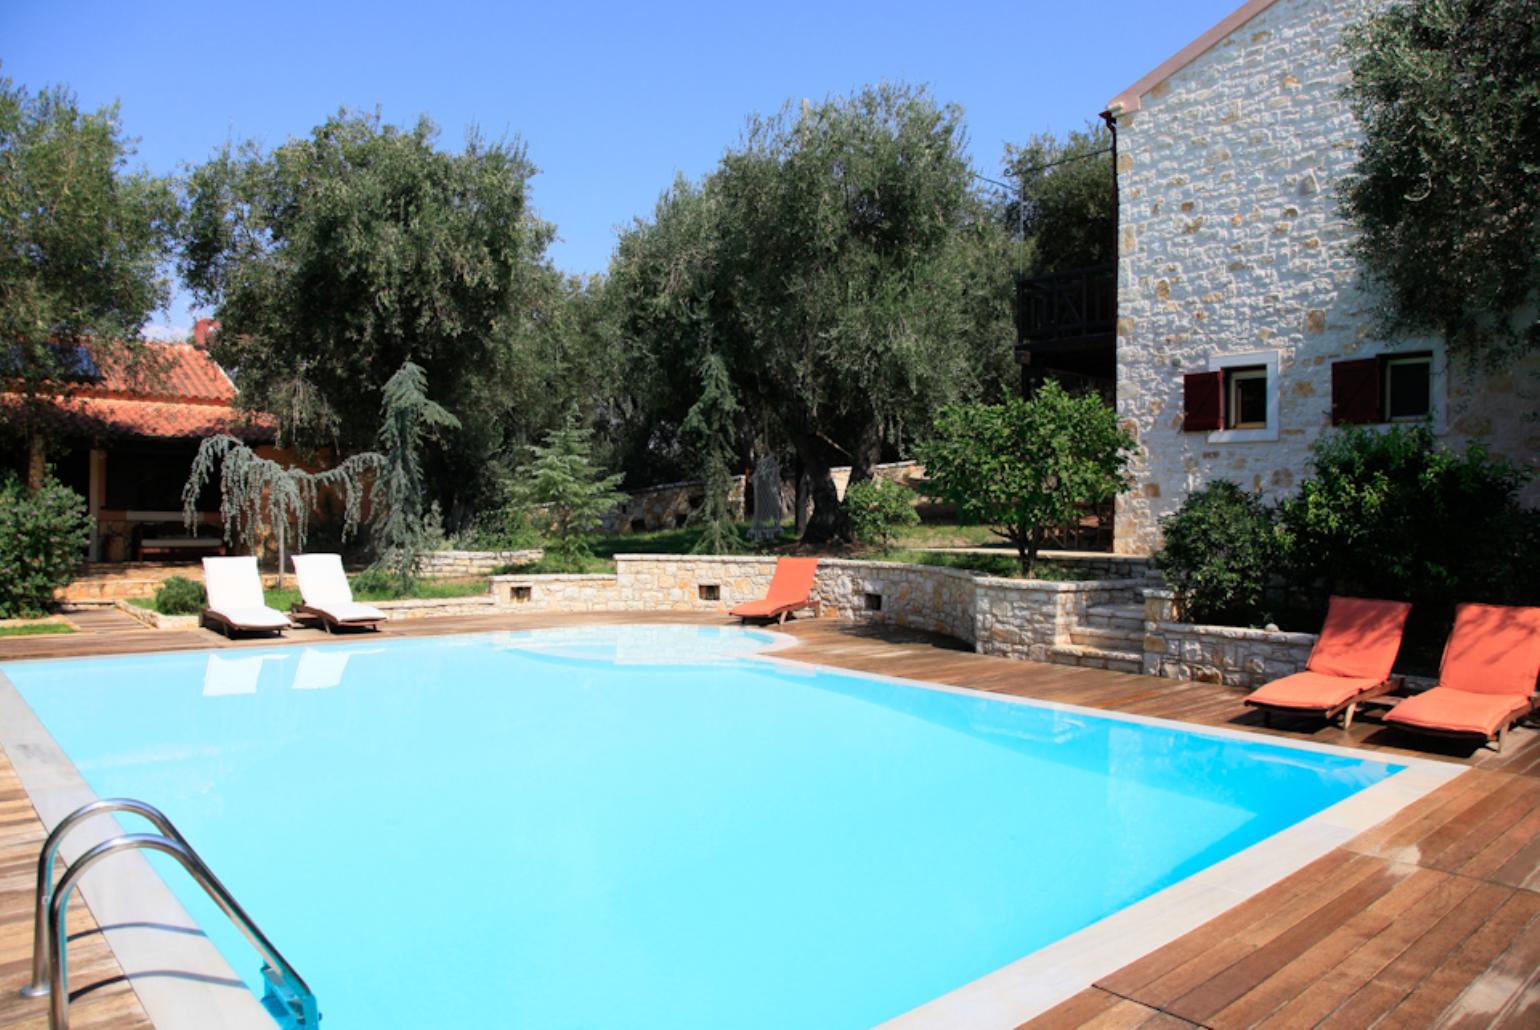 Private swimming pool with garden and terrace area